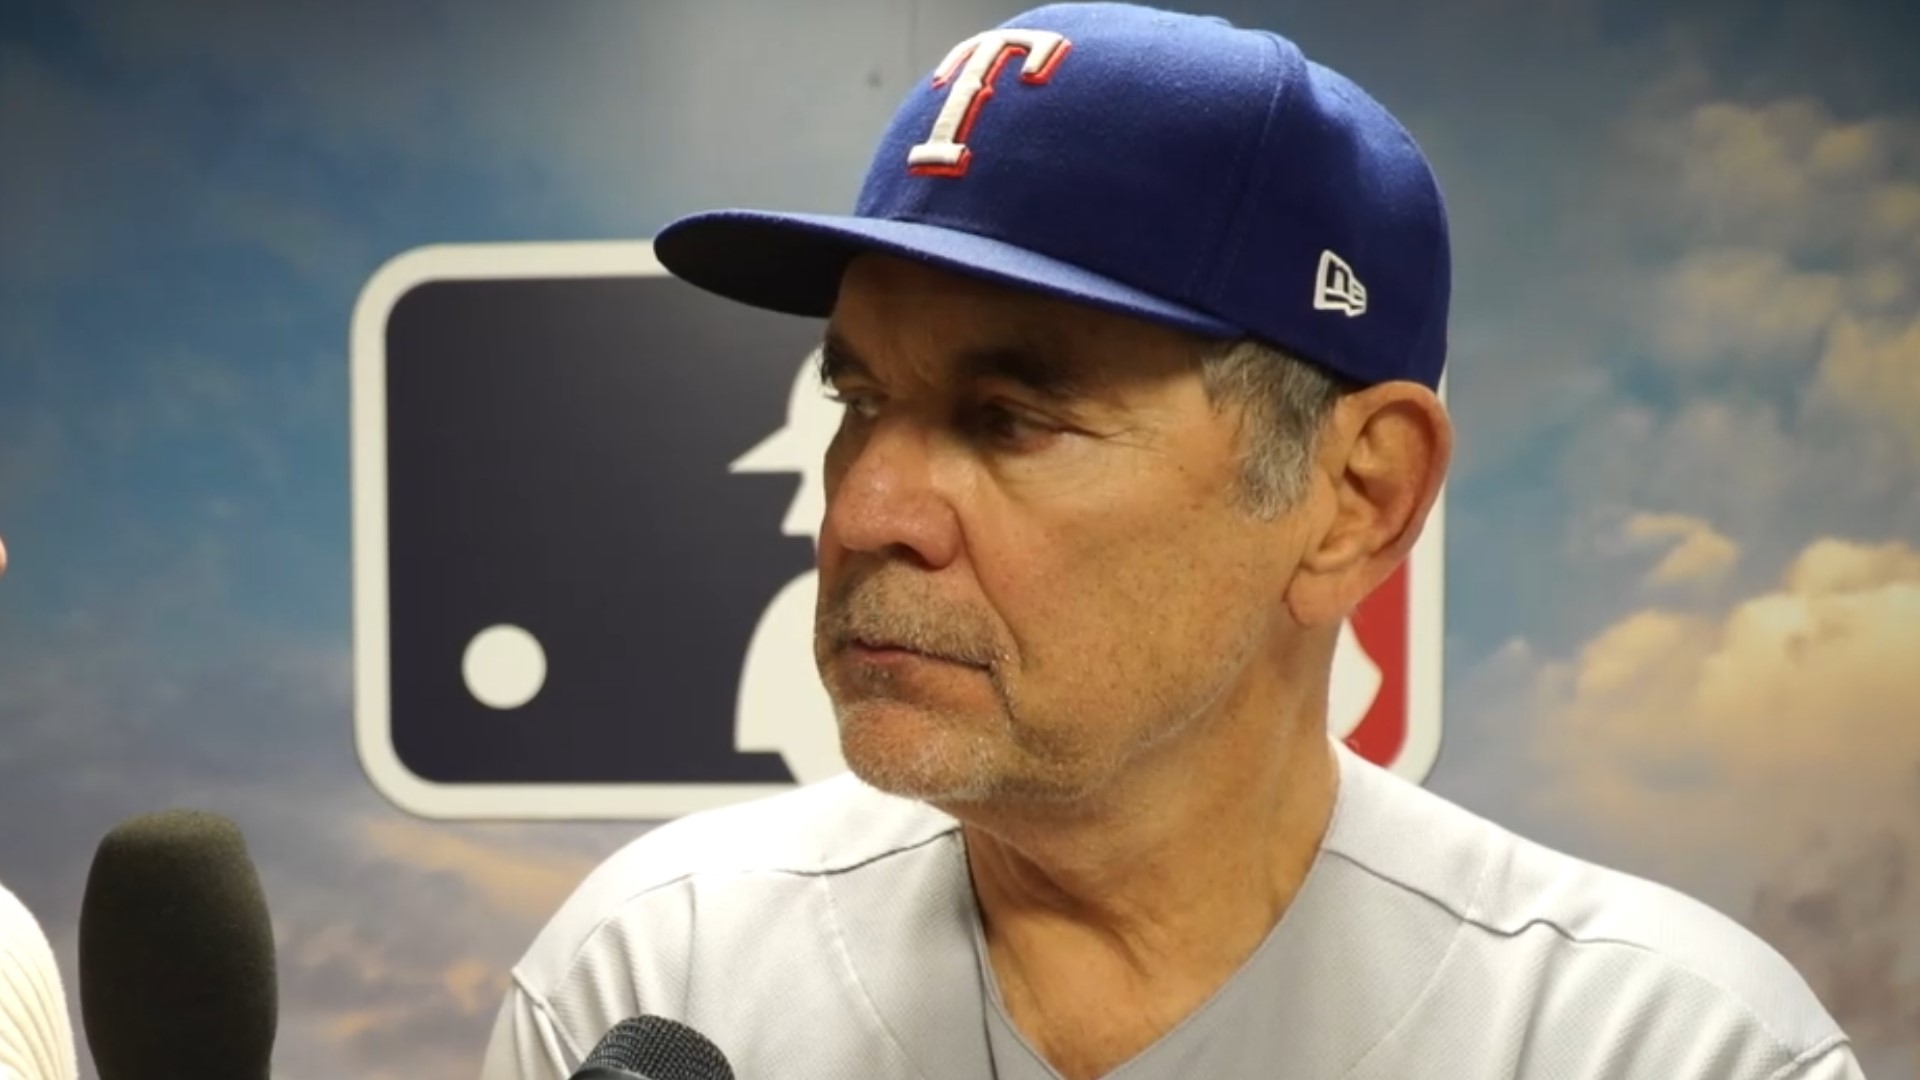 Texas Rangers manager Bruce Bochy joined Bally Sports Southwest for a postgame recap after a 9-3 loss to the Angels.